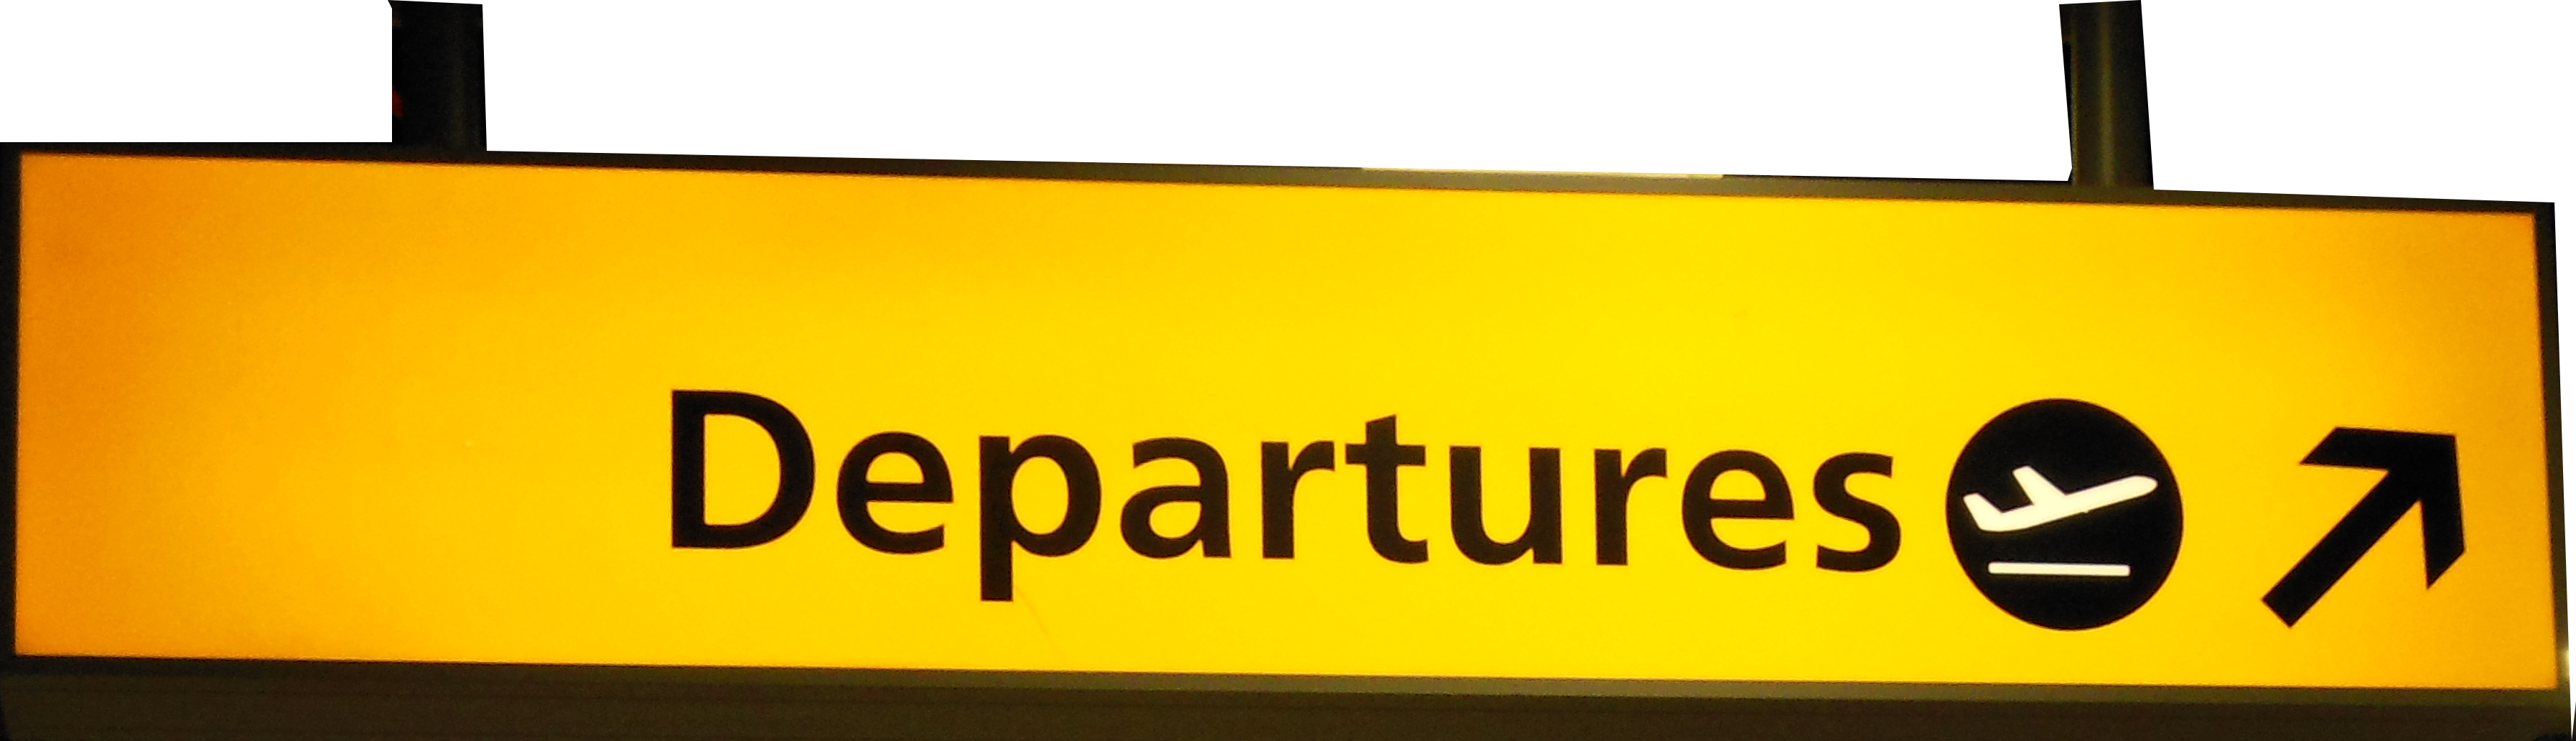 Airport Departures Signage PNG